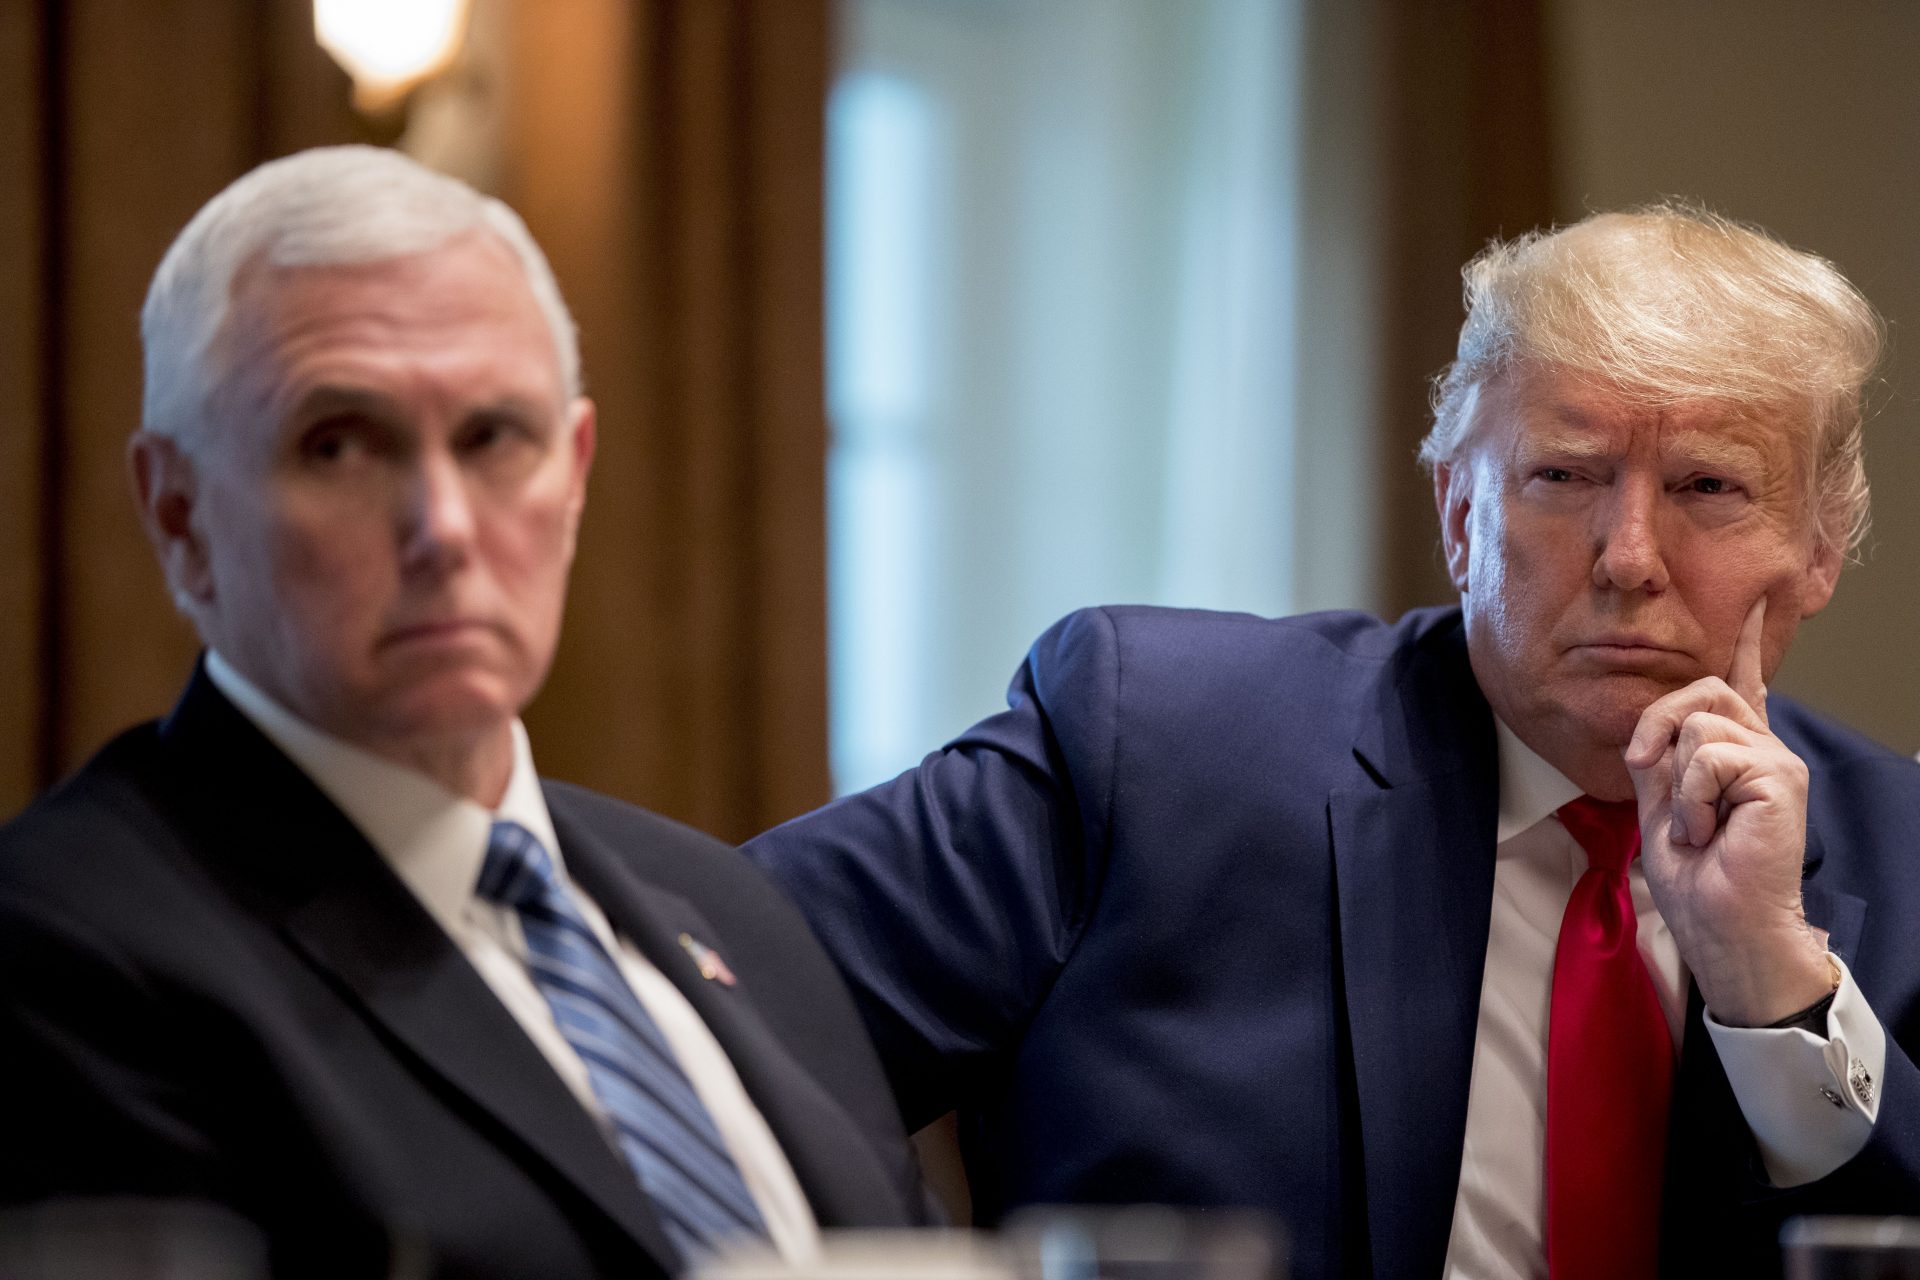 President Donald Trump and Vice President Mike Pence meet with pharmaceutical executives in the Cabinet Room of the White House, Monday, March 2, 2020, in Washington.